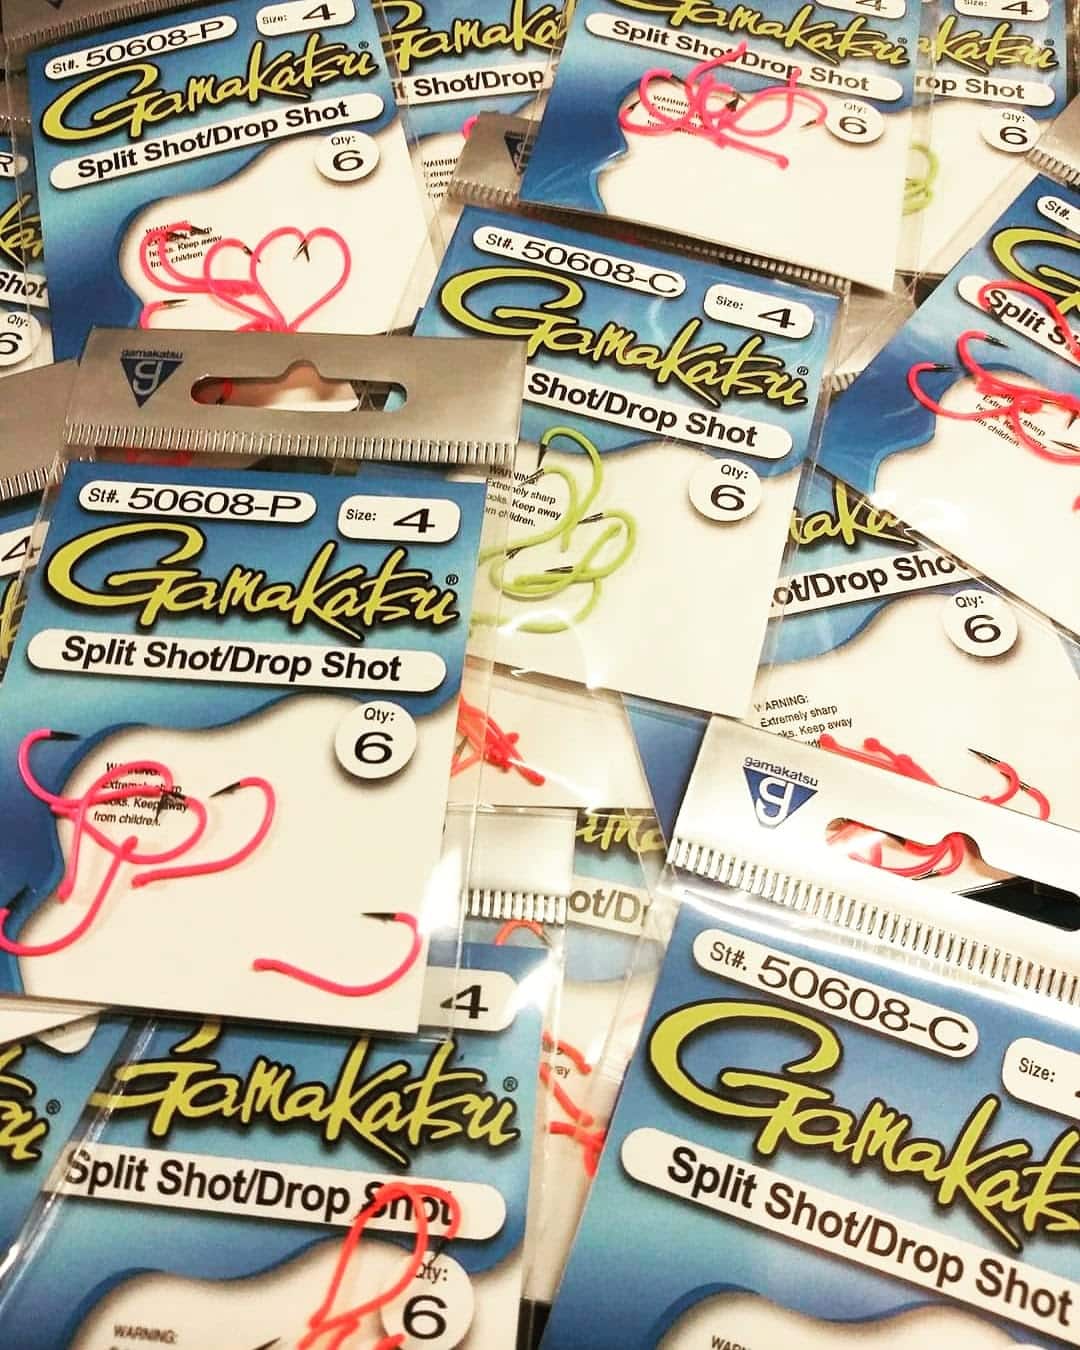 New Terminal Tackle And Fluorescent Split Shot/Drop Shot Available